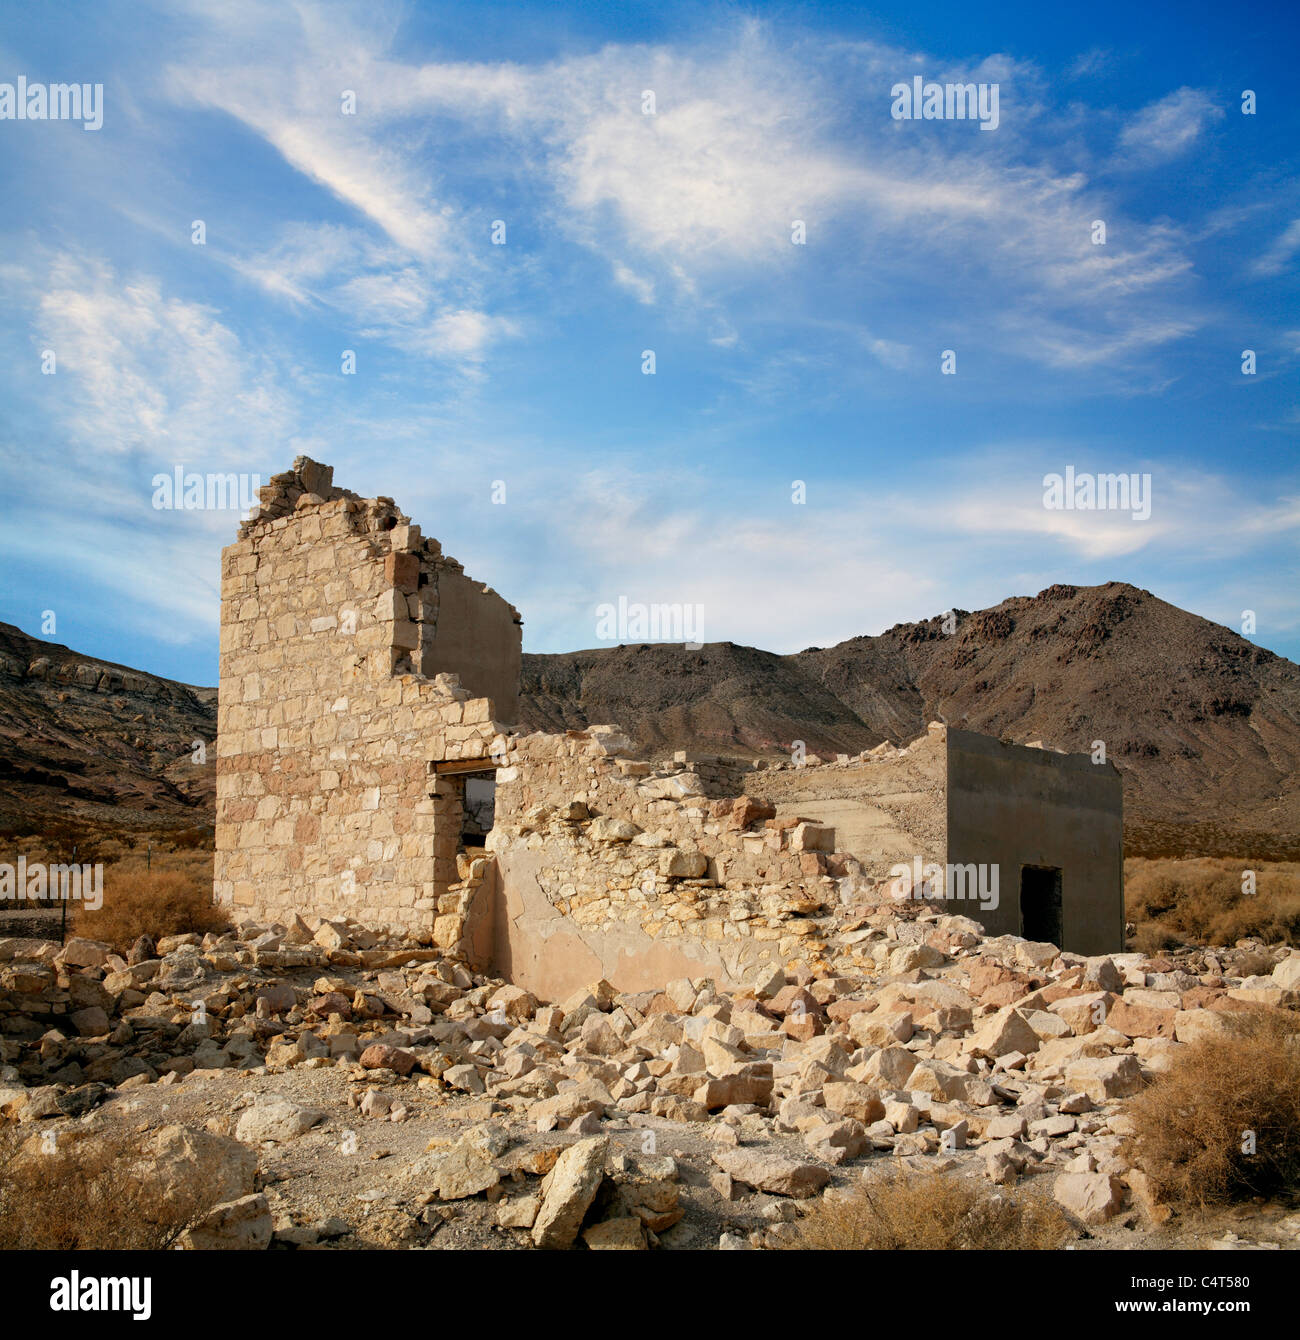 A Crumbling Structure At Rhyolite Nevada, An Abandoned Town Near Death Valley, USA Stock Photo